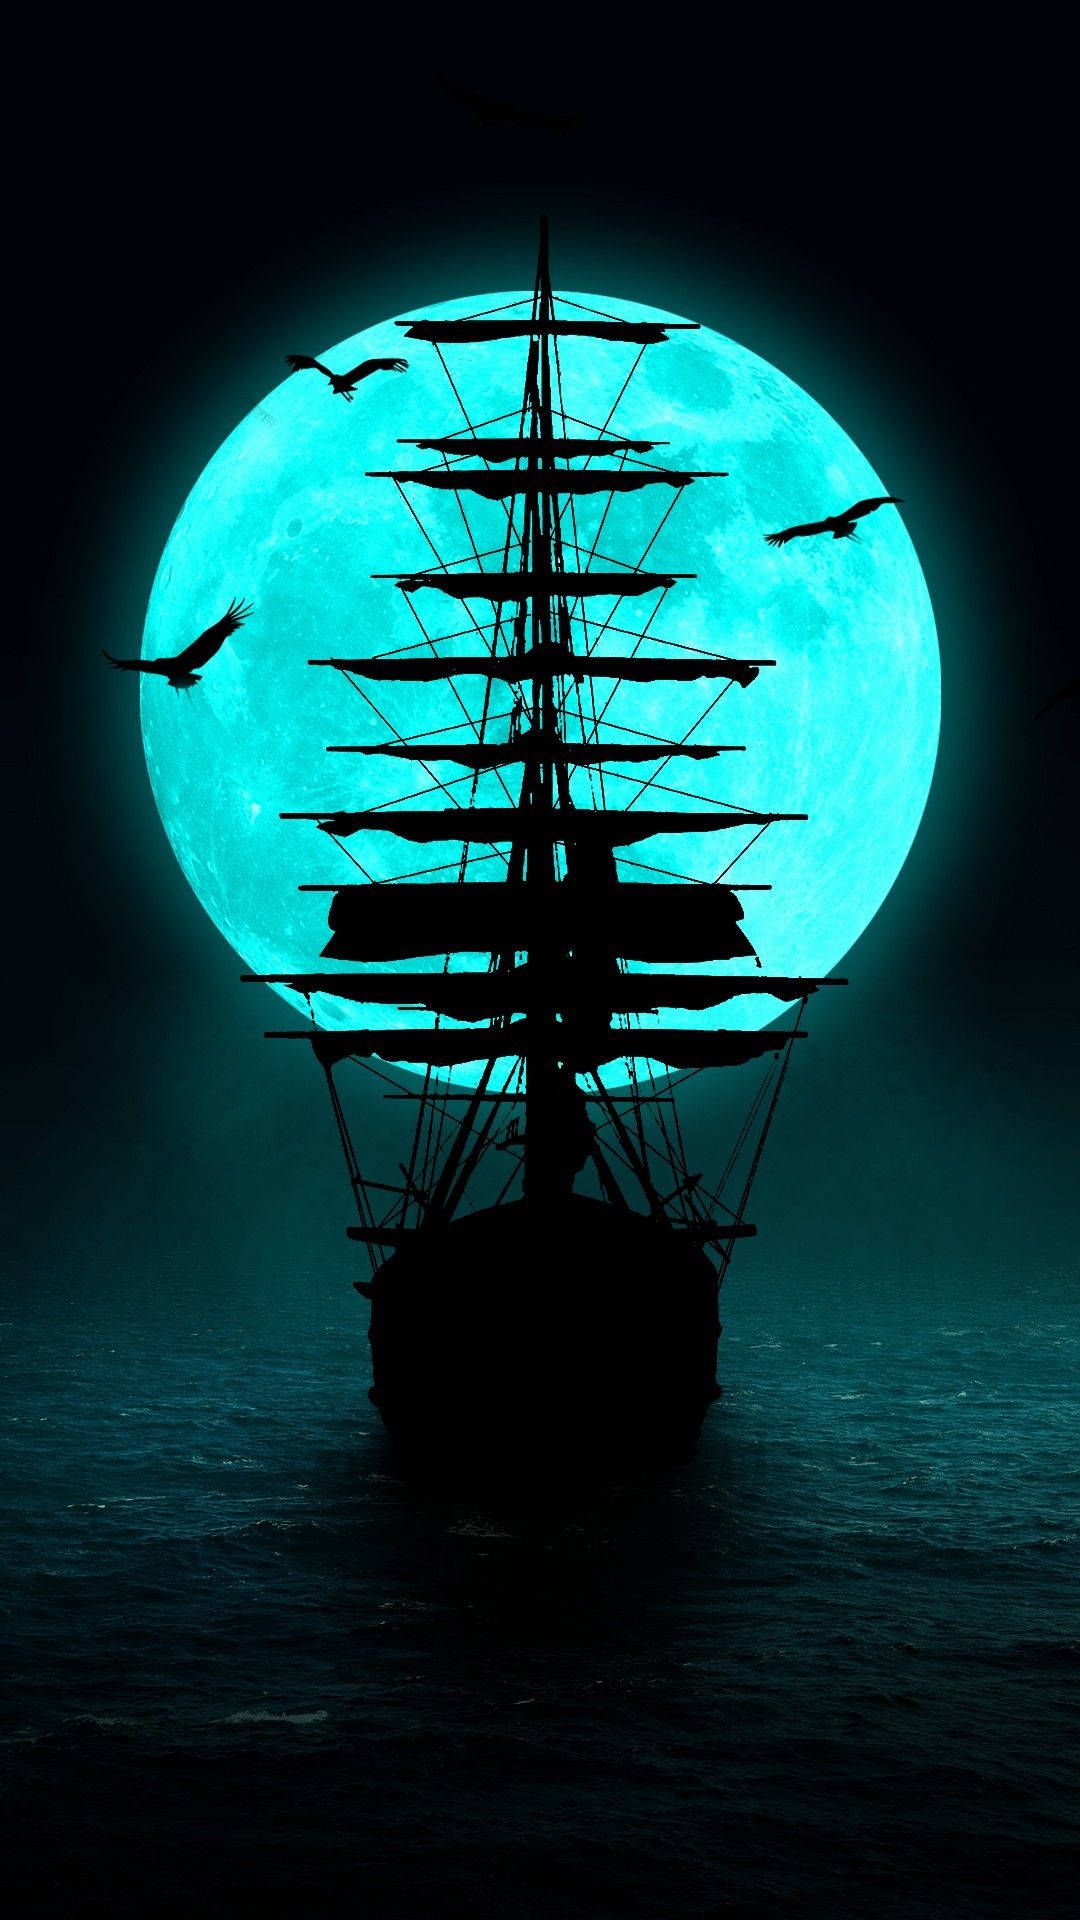 A ship in the ocean with a full moon in the background - Pirate